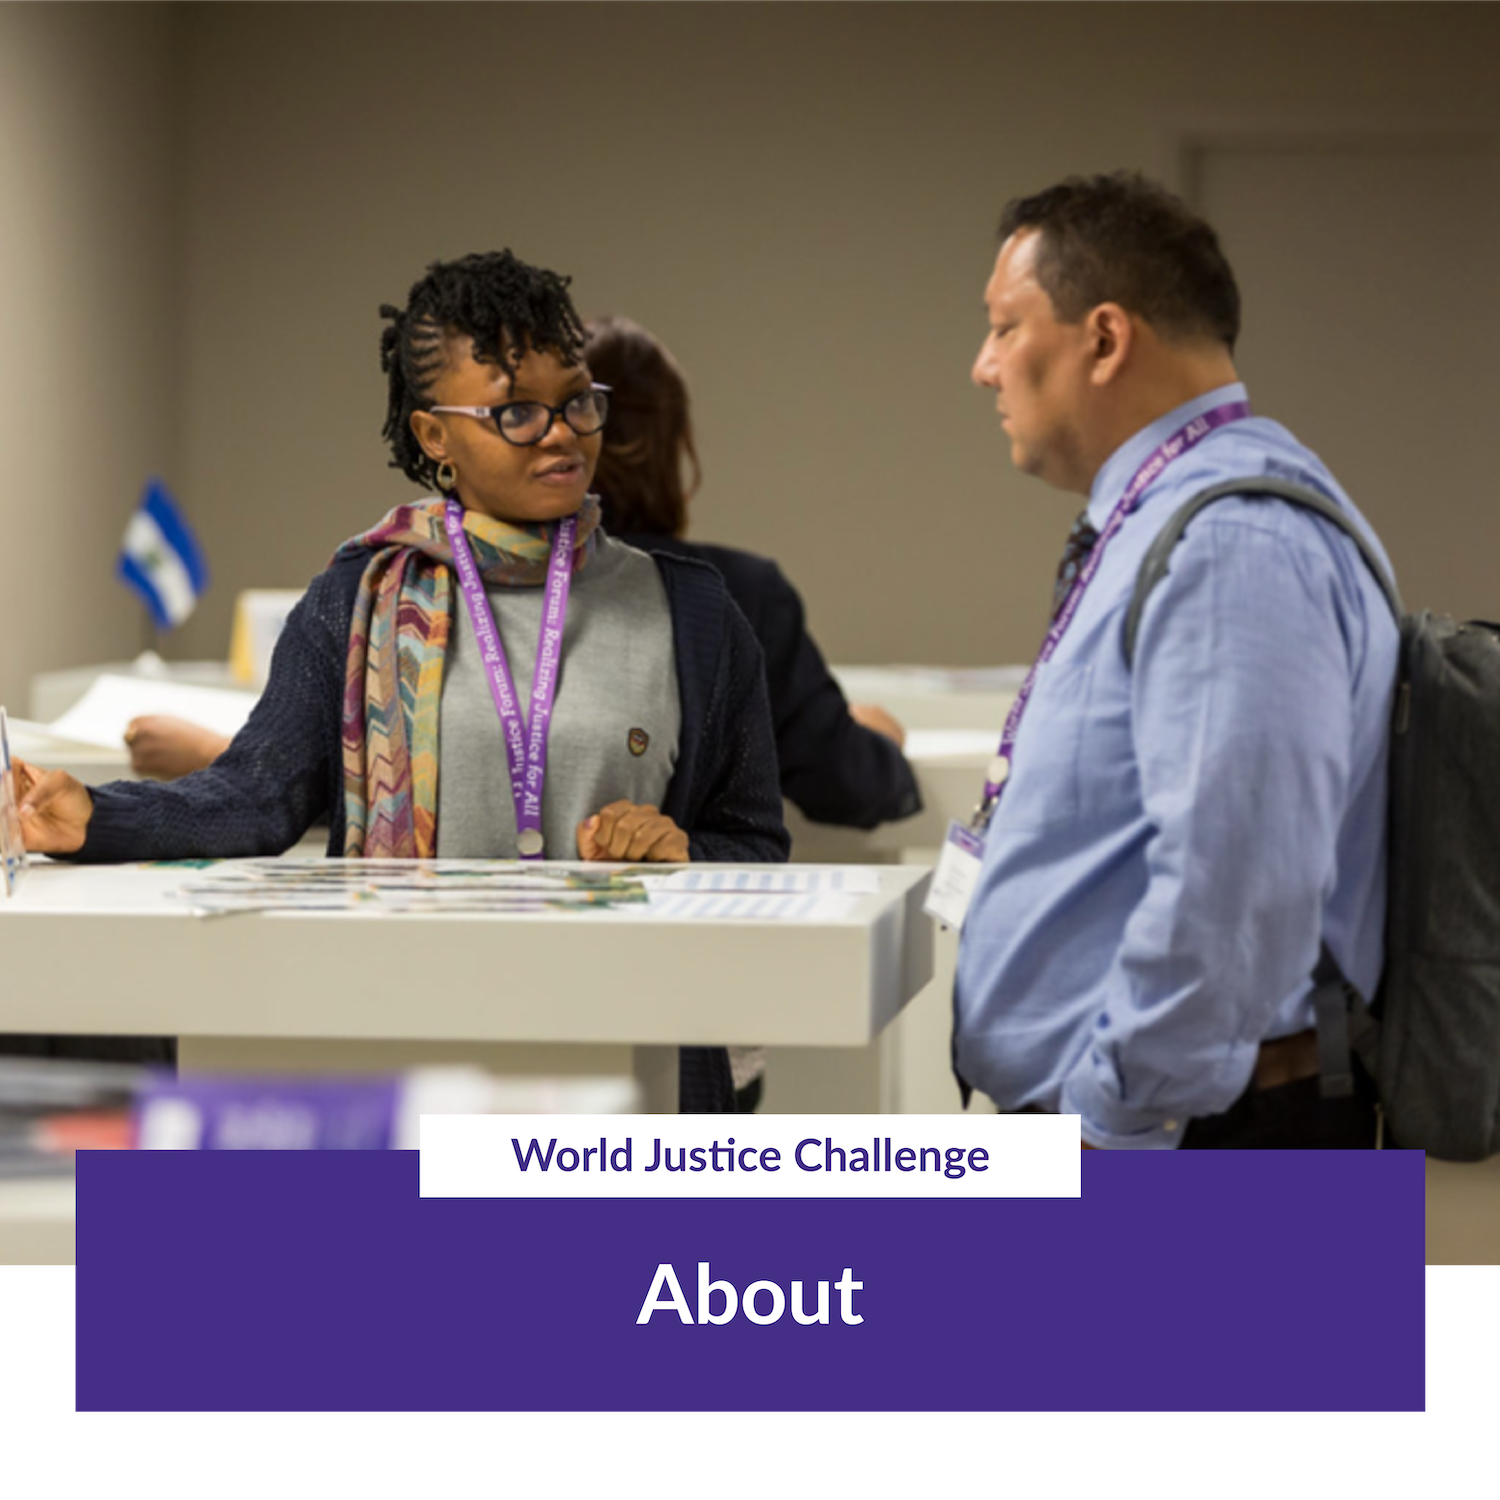 About the World Justice Challenge